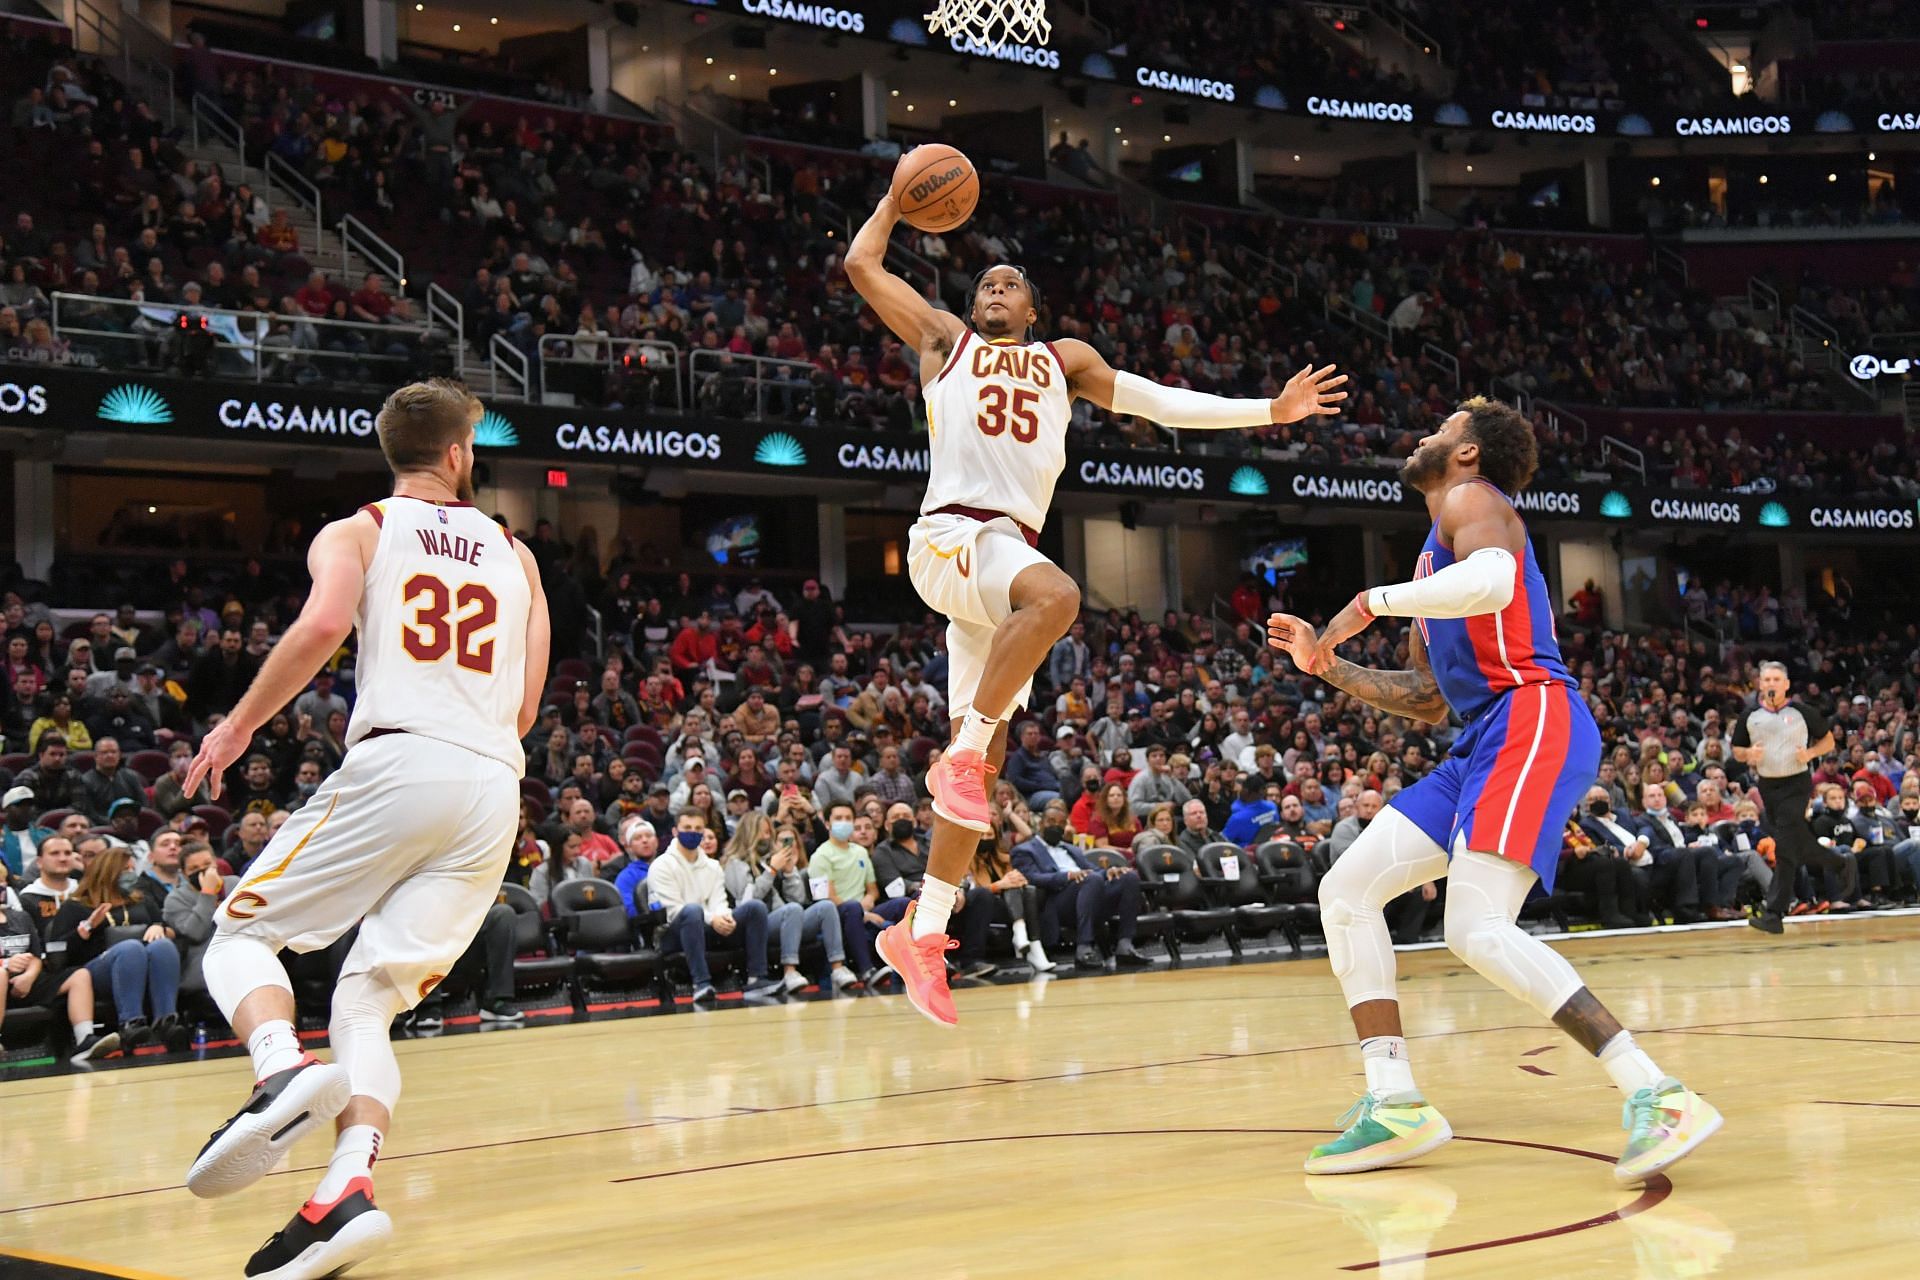 Cleveland Cavaliers in action against the Detroit Pistons.